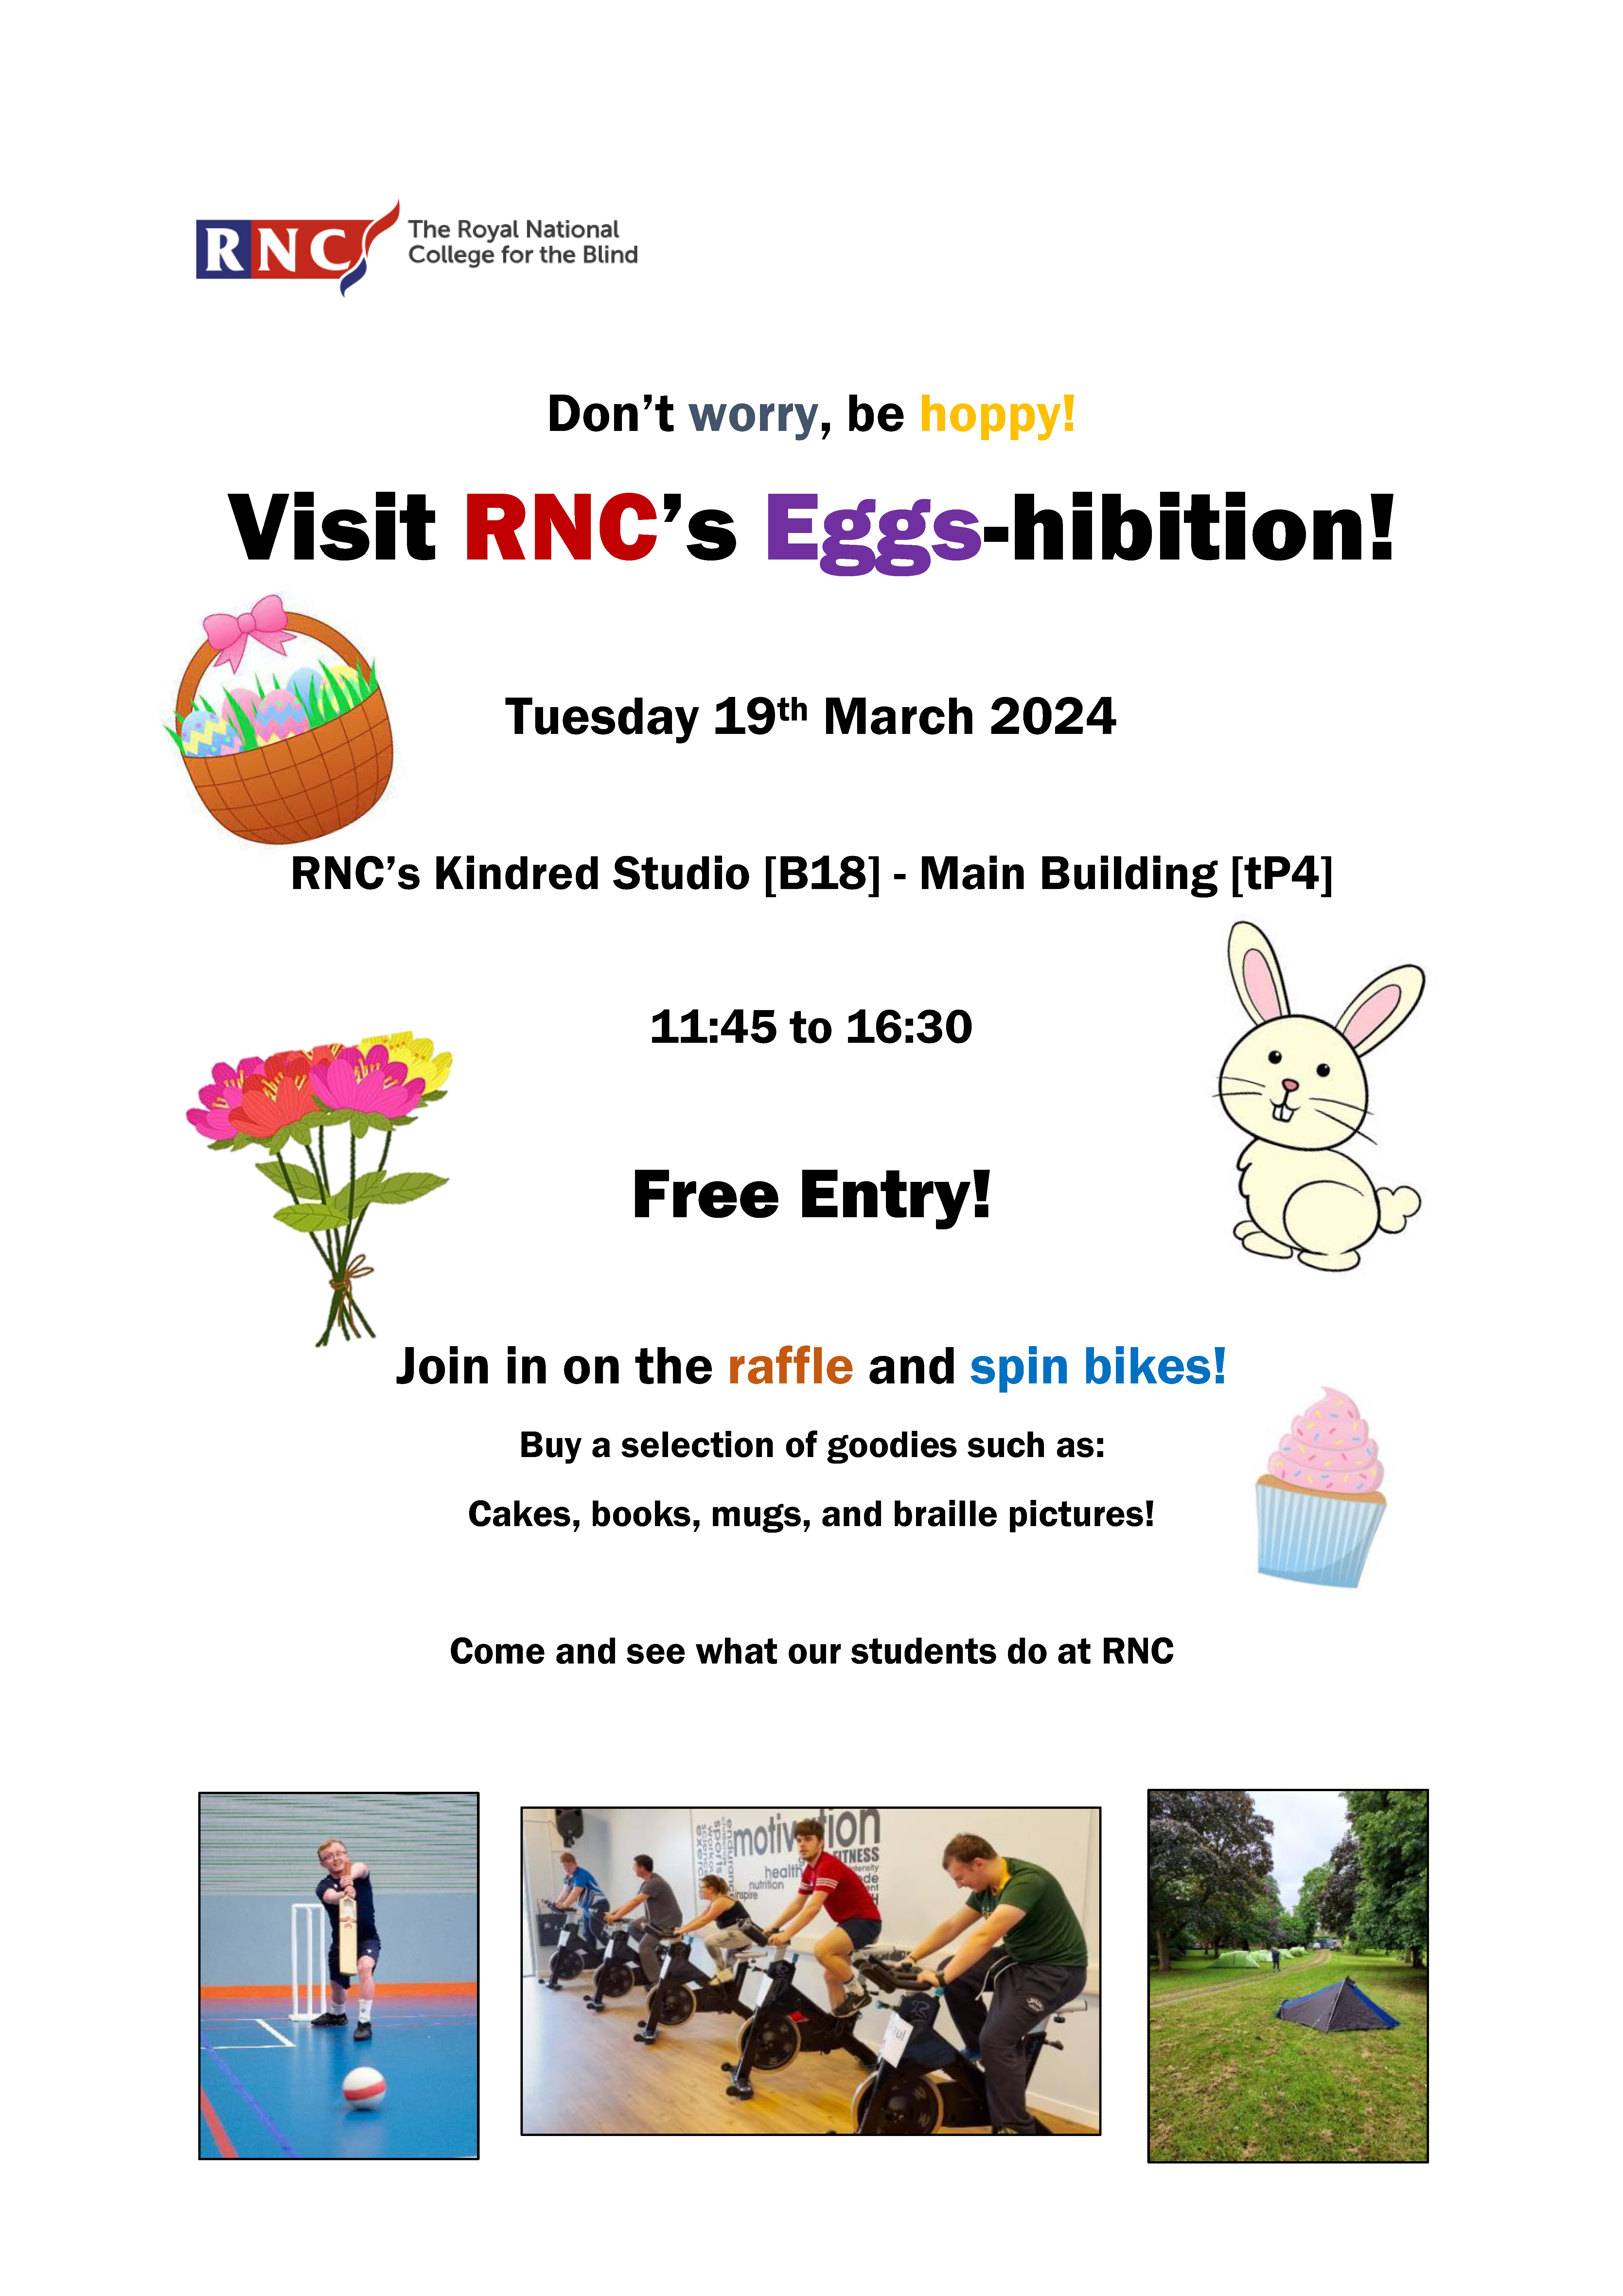 A poster with text and images of flowers, easter eggs and bunnies